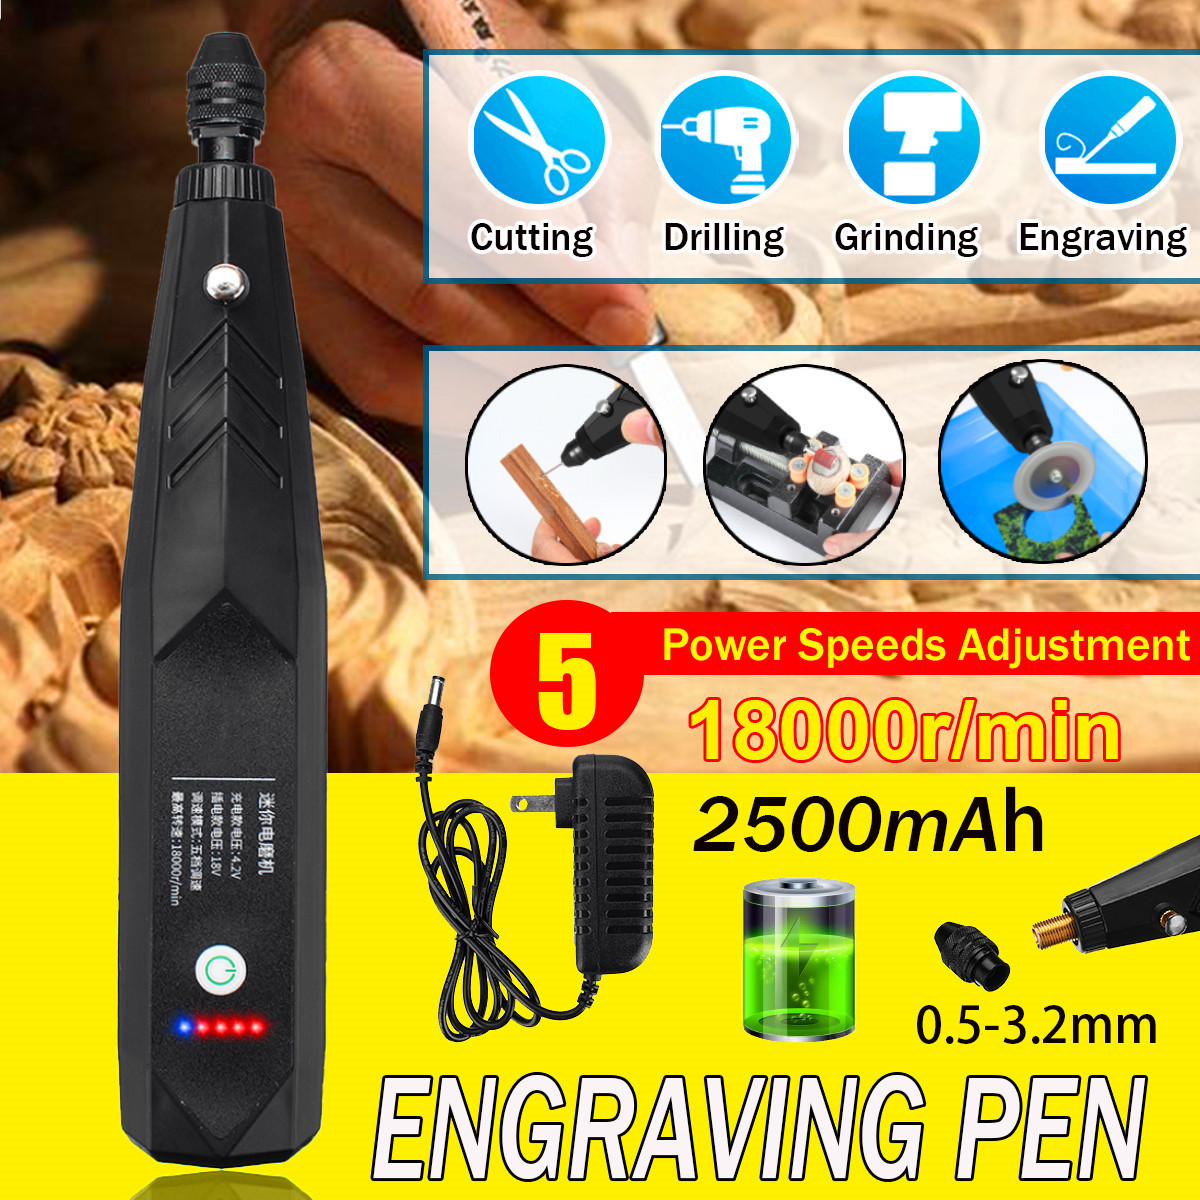 Rechargeable-5-Speed-Power-Adjustable-Electric-Engraving-Pen-18000rMin-Metal-Jade-Carving-Marking-Ma-1750287-2